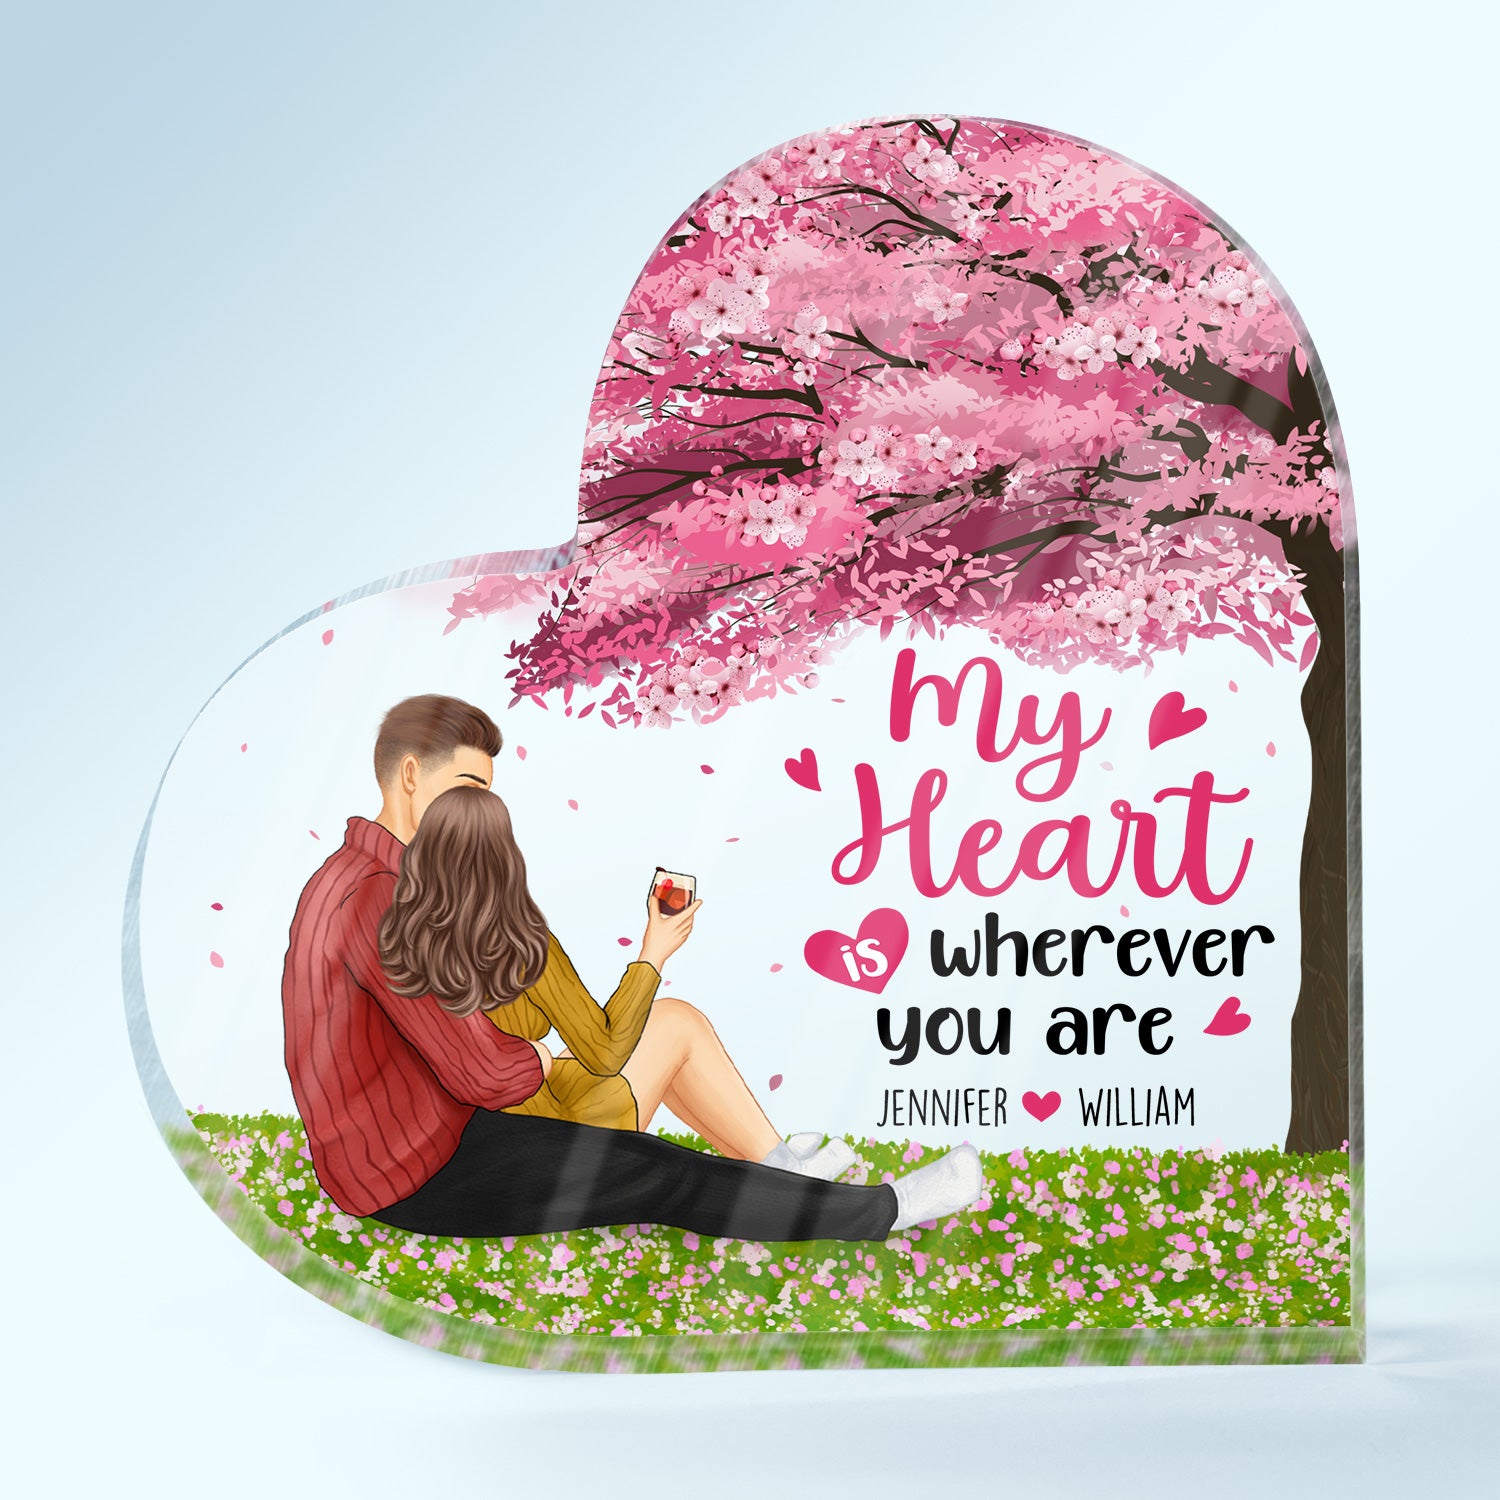 My Heart Is Wherever You Are - Gift For Couples - Personalized Heart Shaped Acrylic Plaque